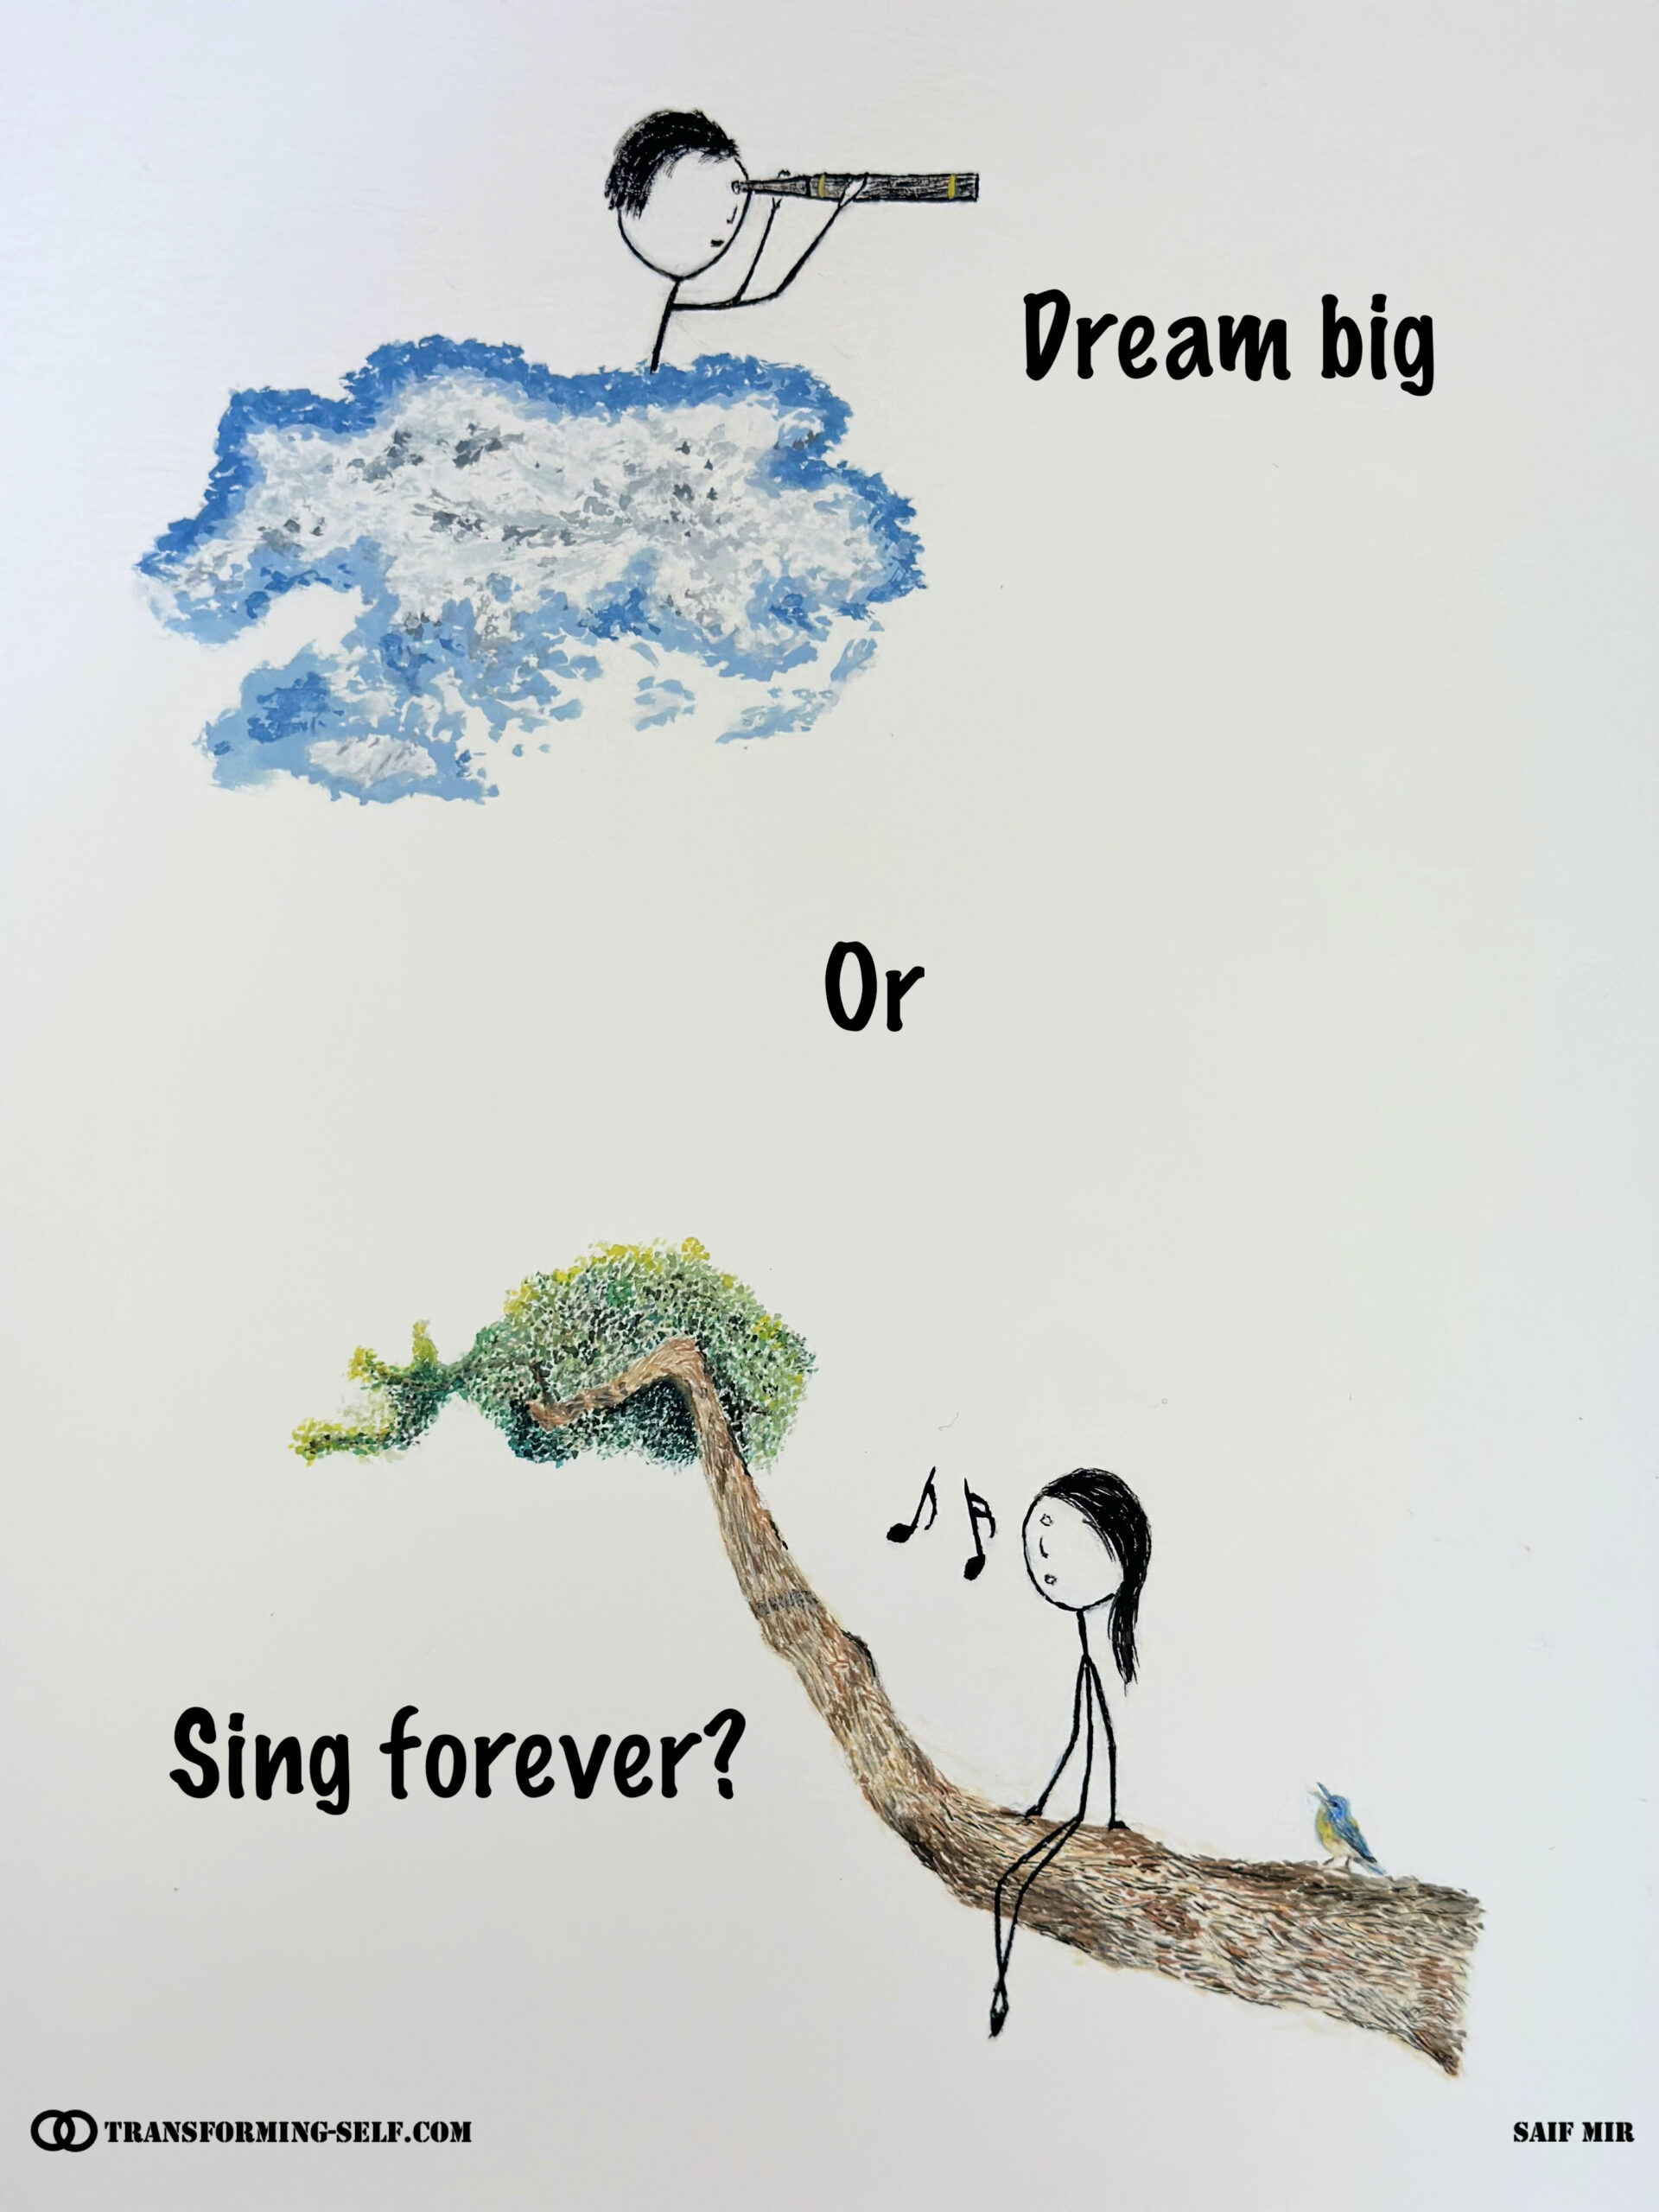 Dream big or sing forever?